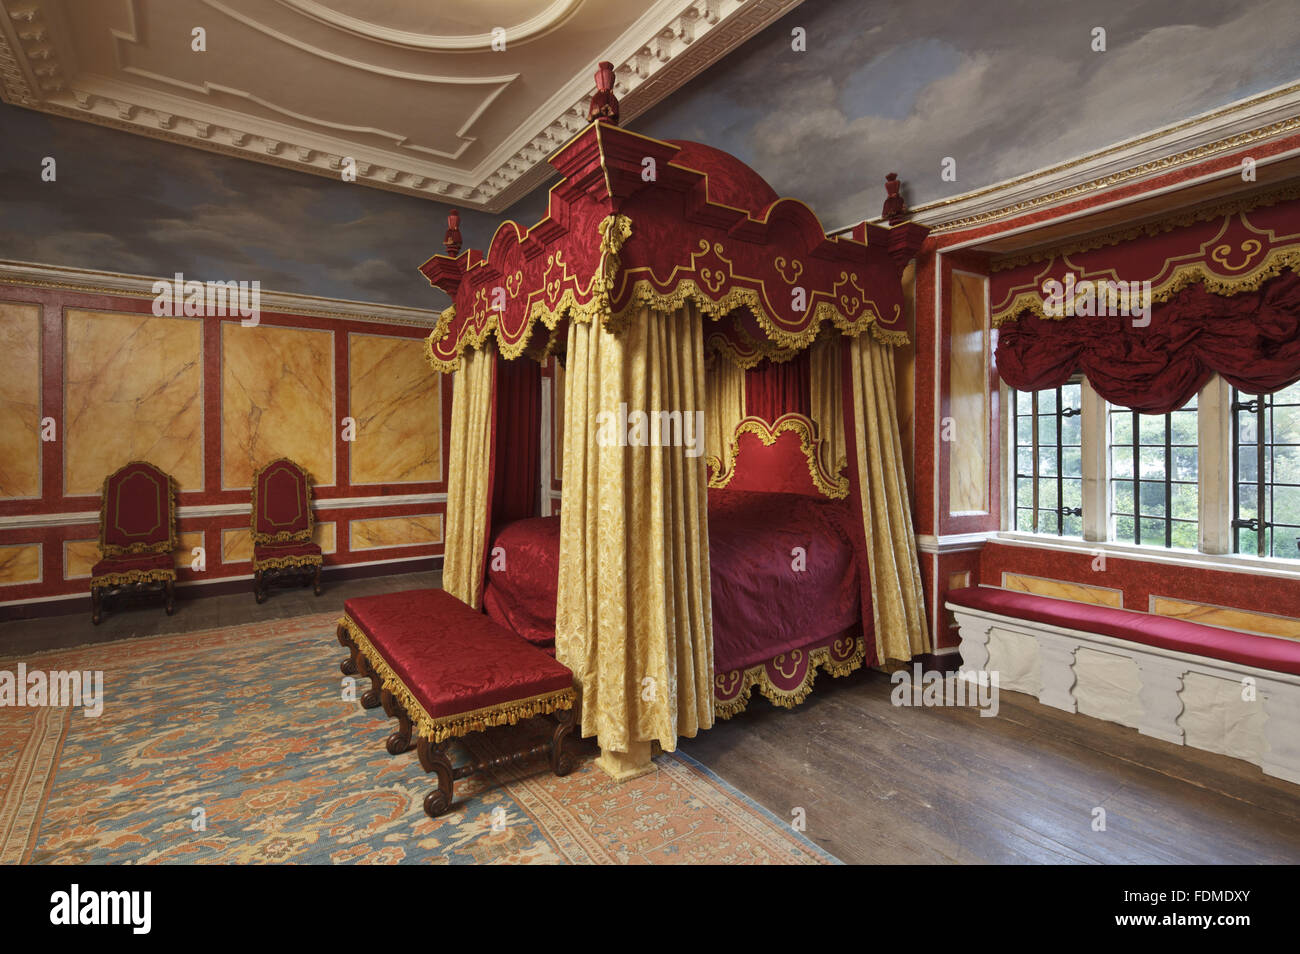 The Queen Anne Bedchamber at Avebury Manor, Wiltshire. Stock Photo